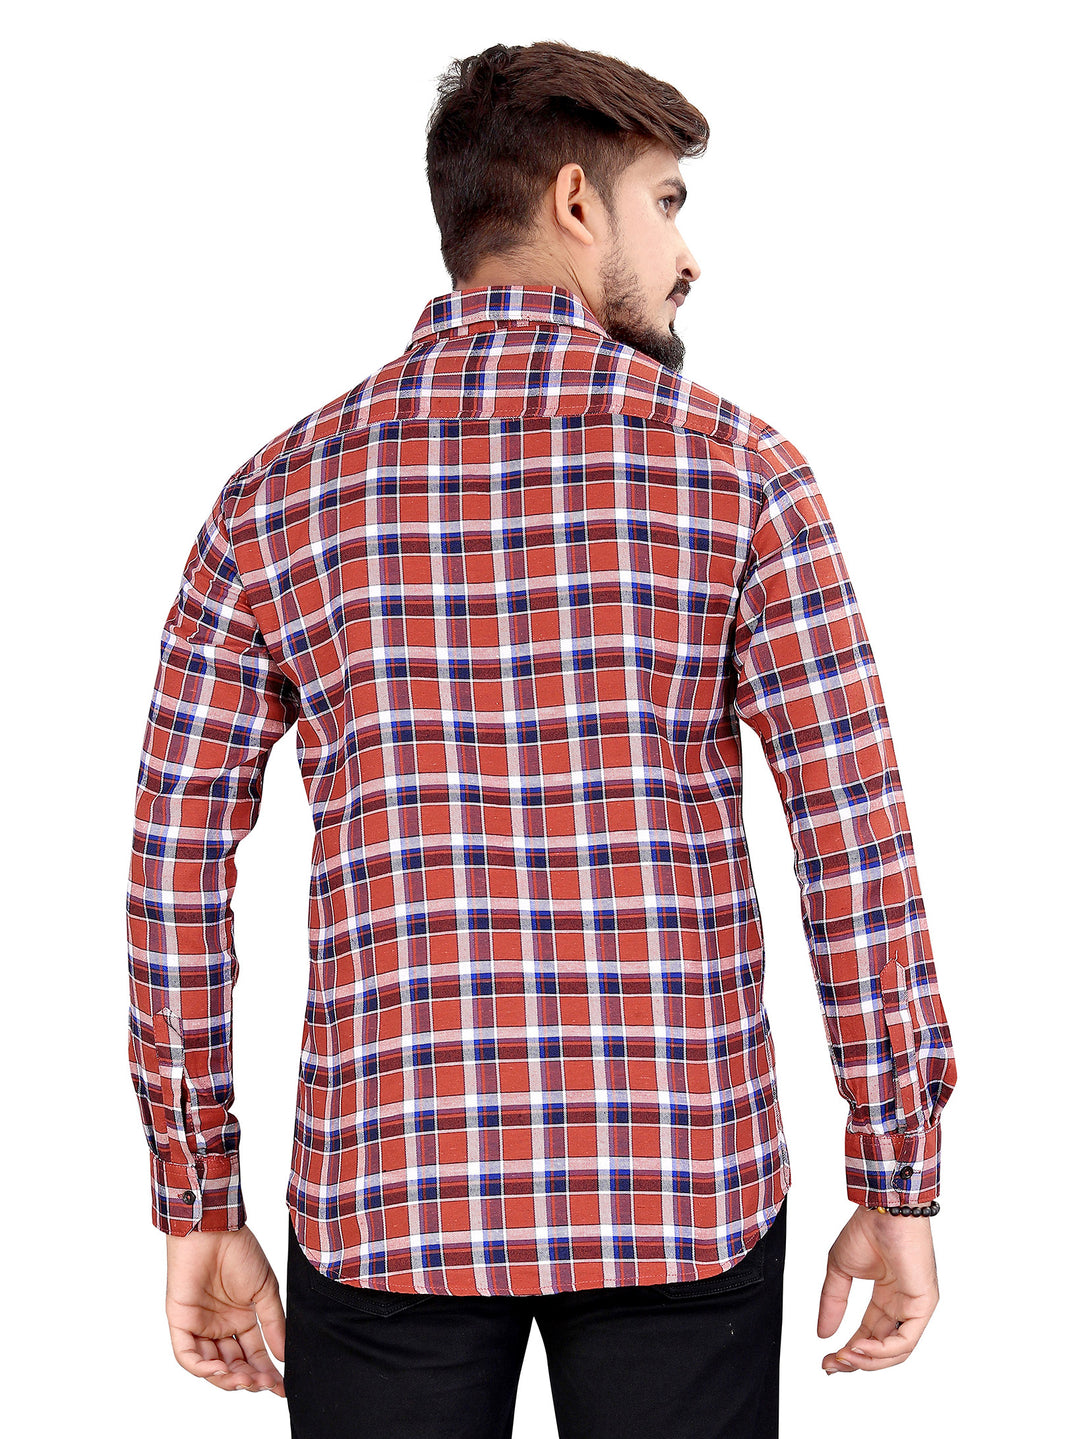 Maroon and Blue Gingham Checked Shirt